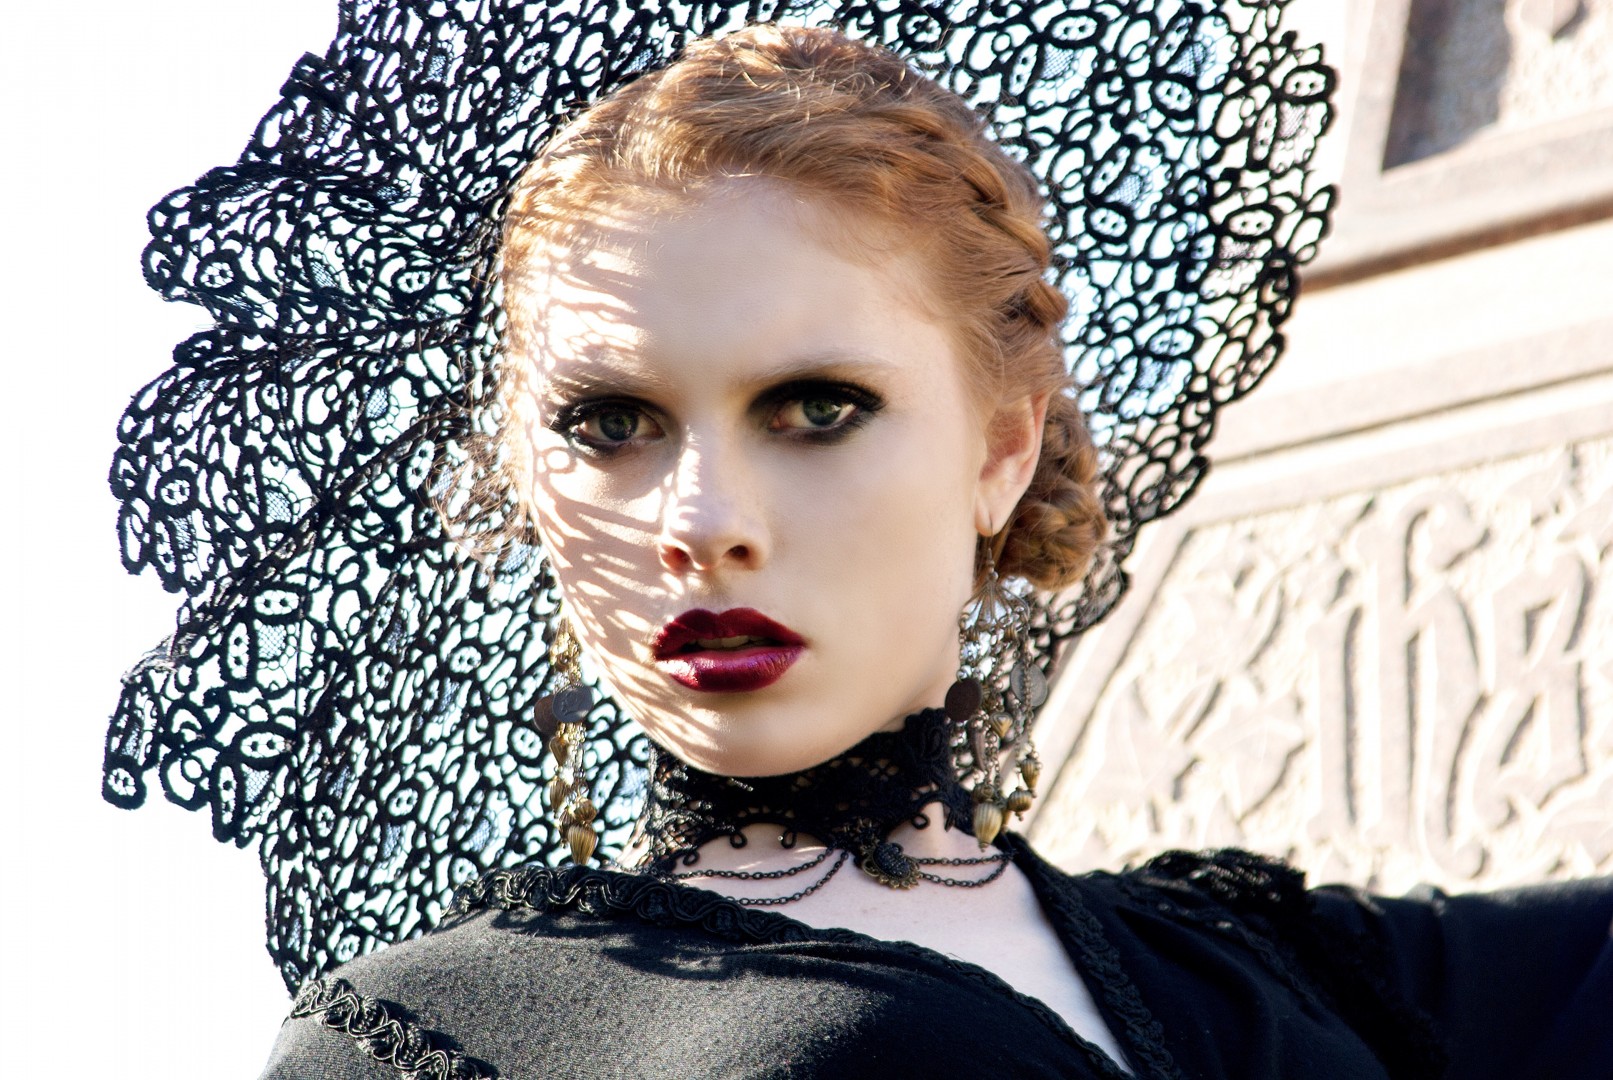 Gothic styled shoot featuring lace hat by Annabel Allen of UK Milliners Guild